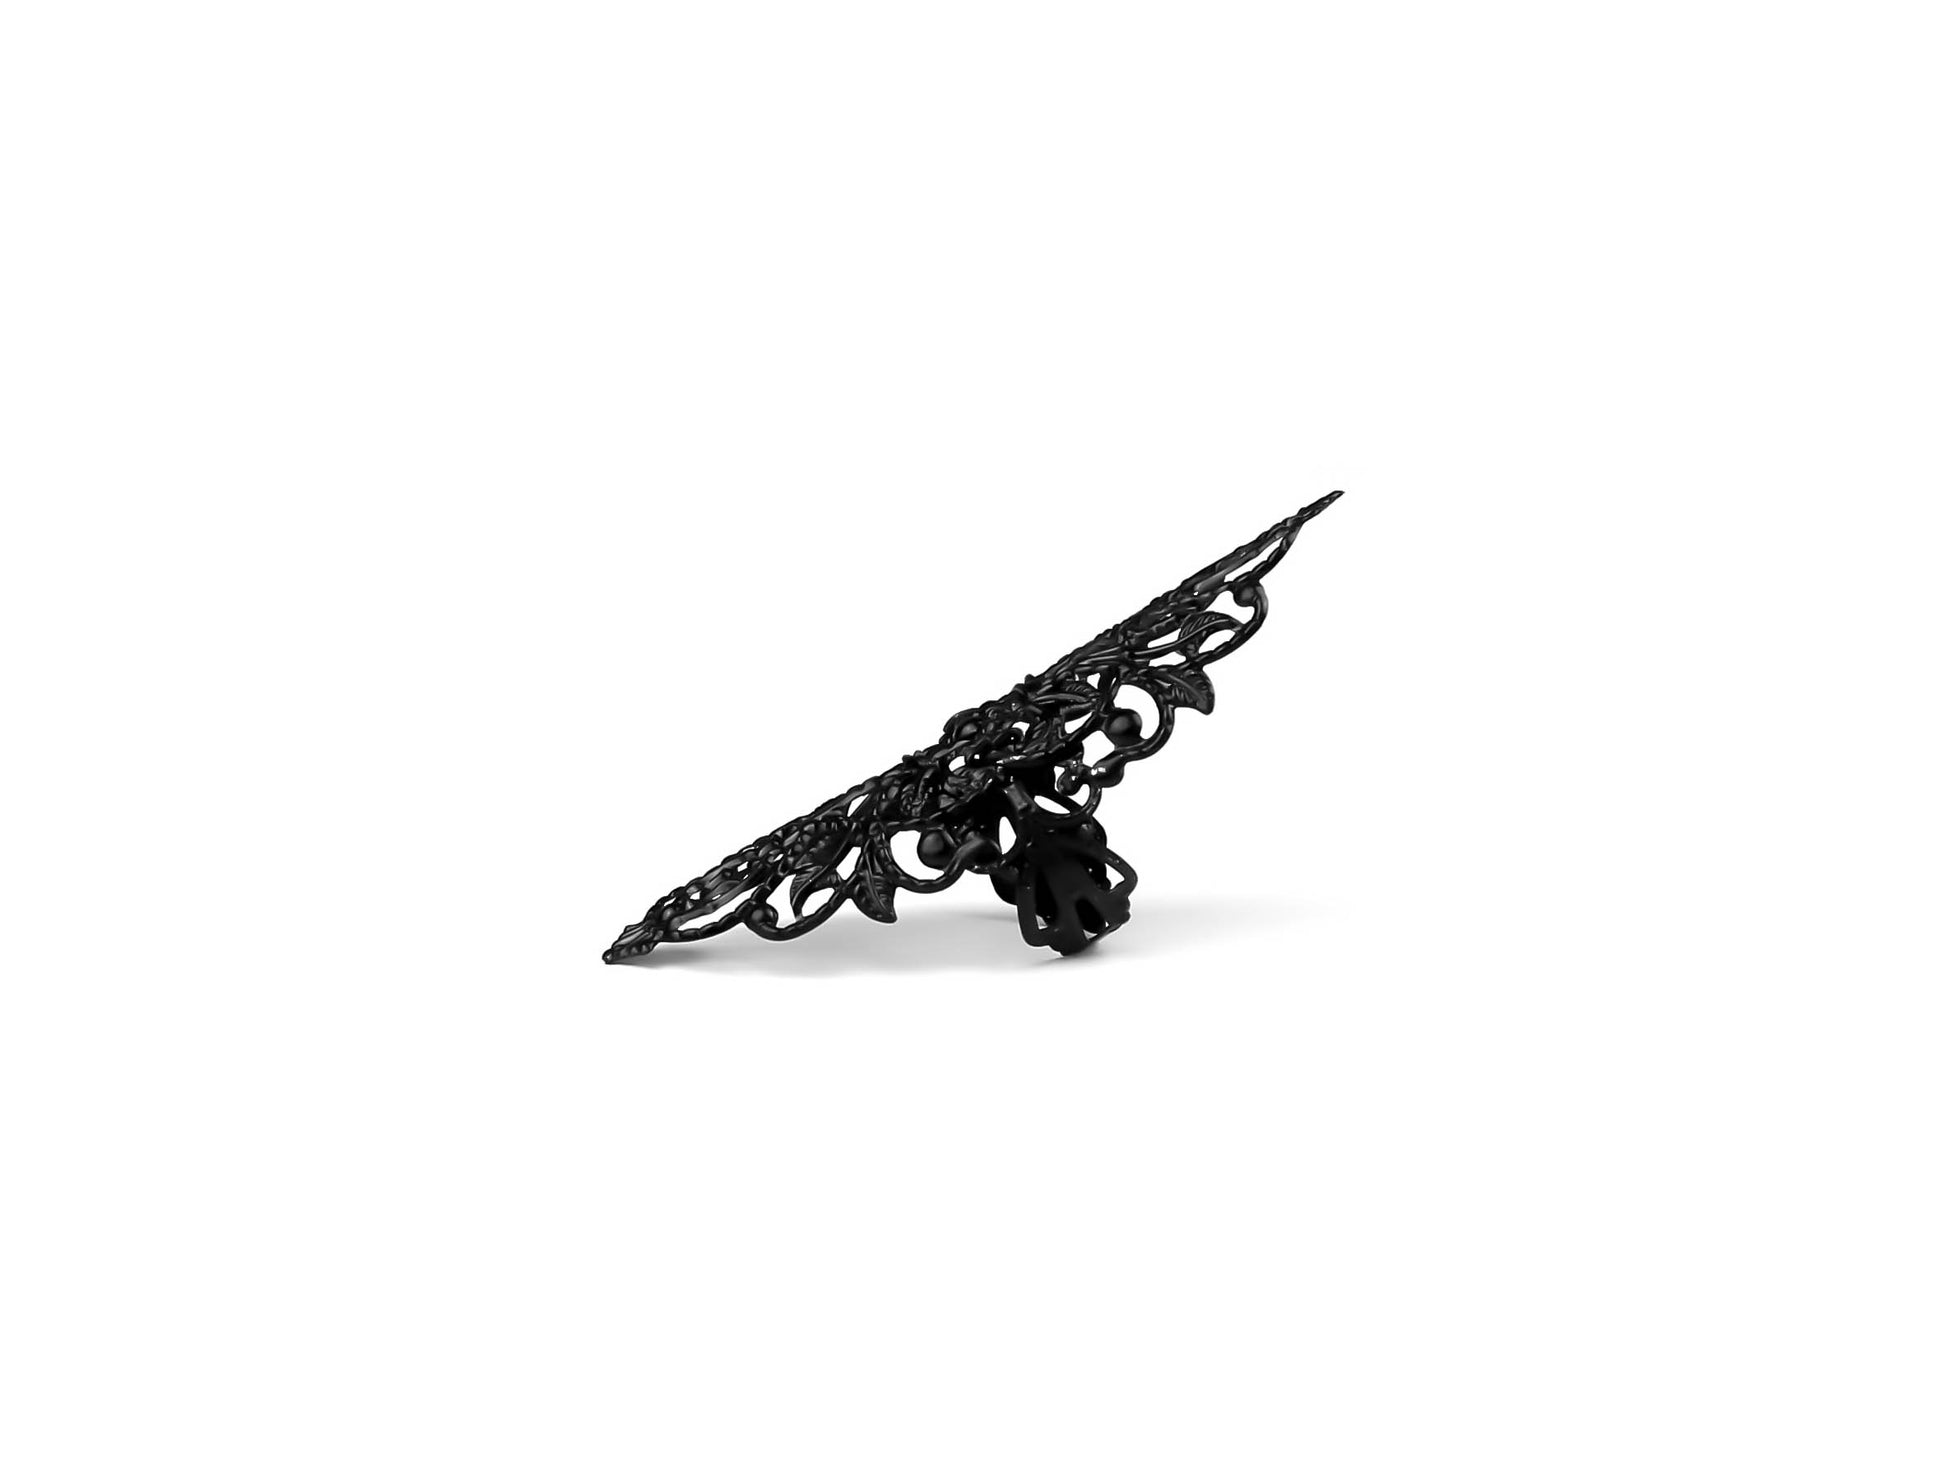 Embrace the neo-gothic elegance with this wide black gothic ring from Myril Jewels, ideal for those who fancy dark, whimsical styles. This statement piece is perfect for daily wear, festival attire, or as a distinctive goth girlfriend gift, capturing the essence of Halloween and punk jewelry with a minimalist touch.